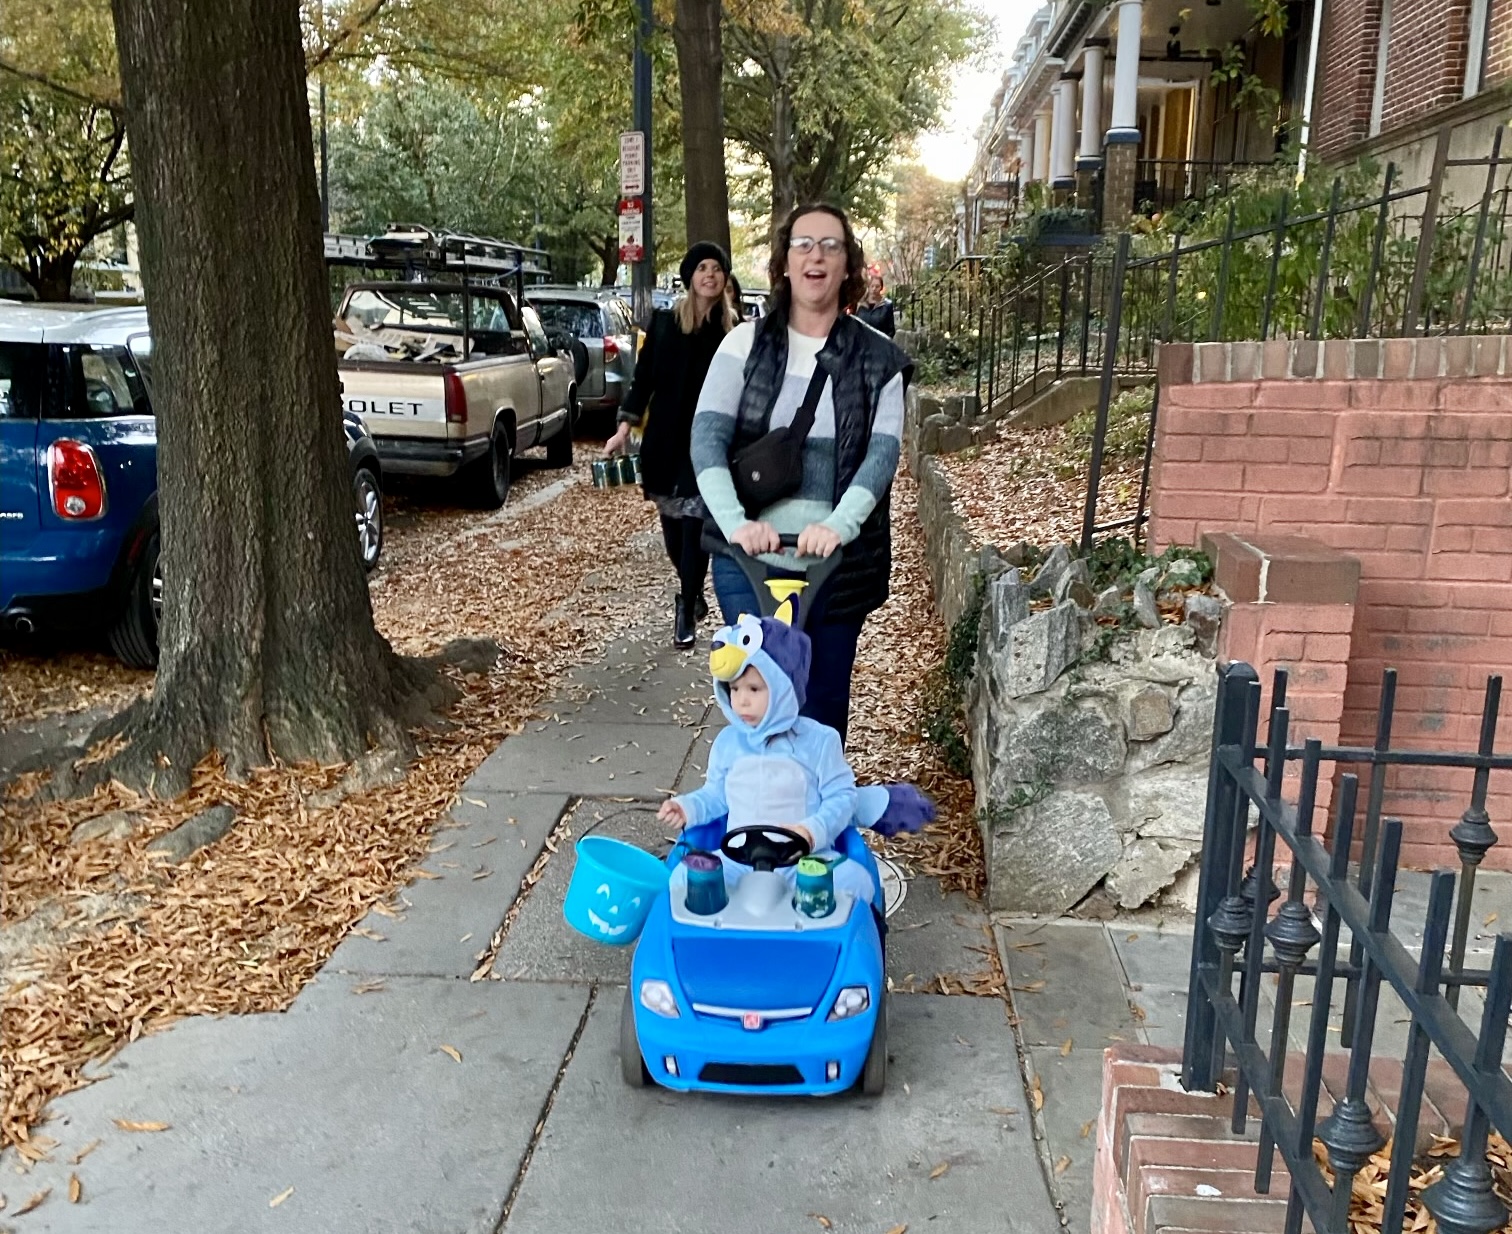 Councilmember Nadeau is pushing her daughter along the sidewalk in a toy car. Her daughter is wearing a blue bird costume and holding a blue bucket. Councilmember Nadeau is also in costume. There are leaves along the sidewalk and cars parked alongside it.